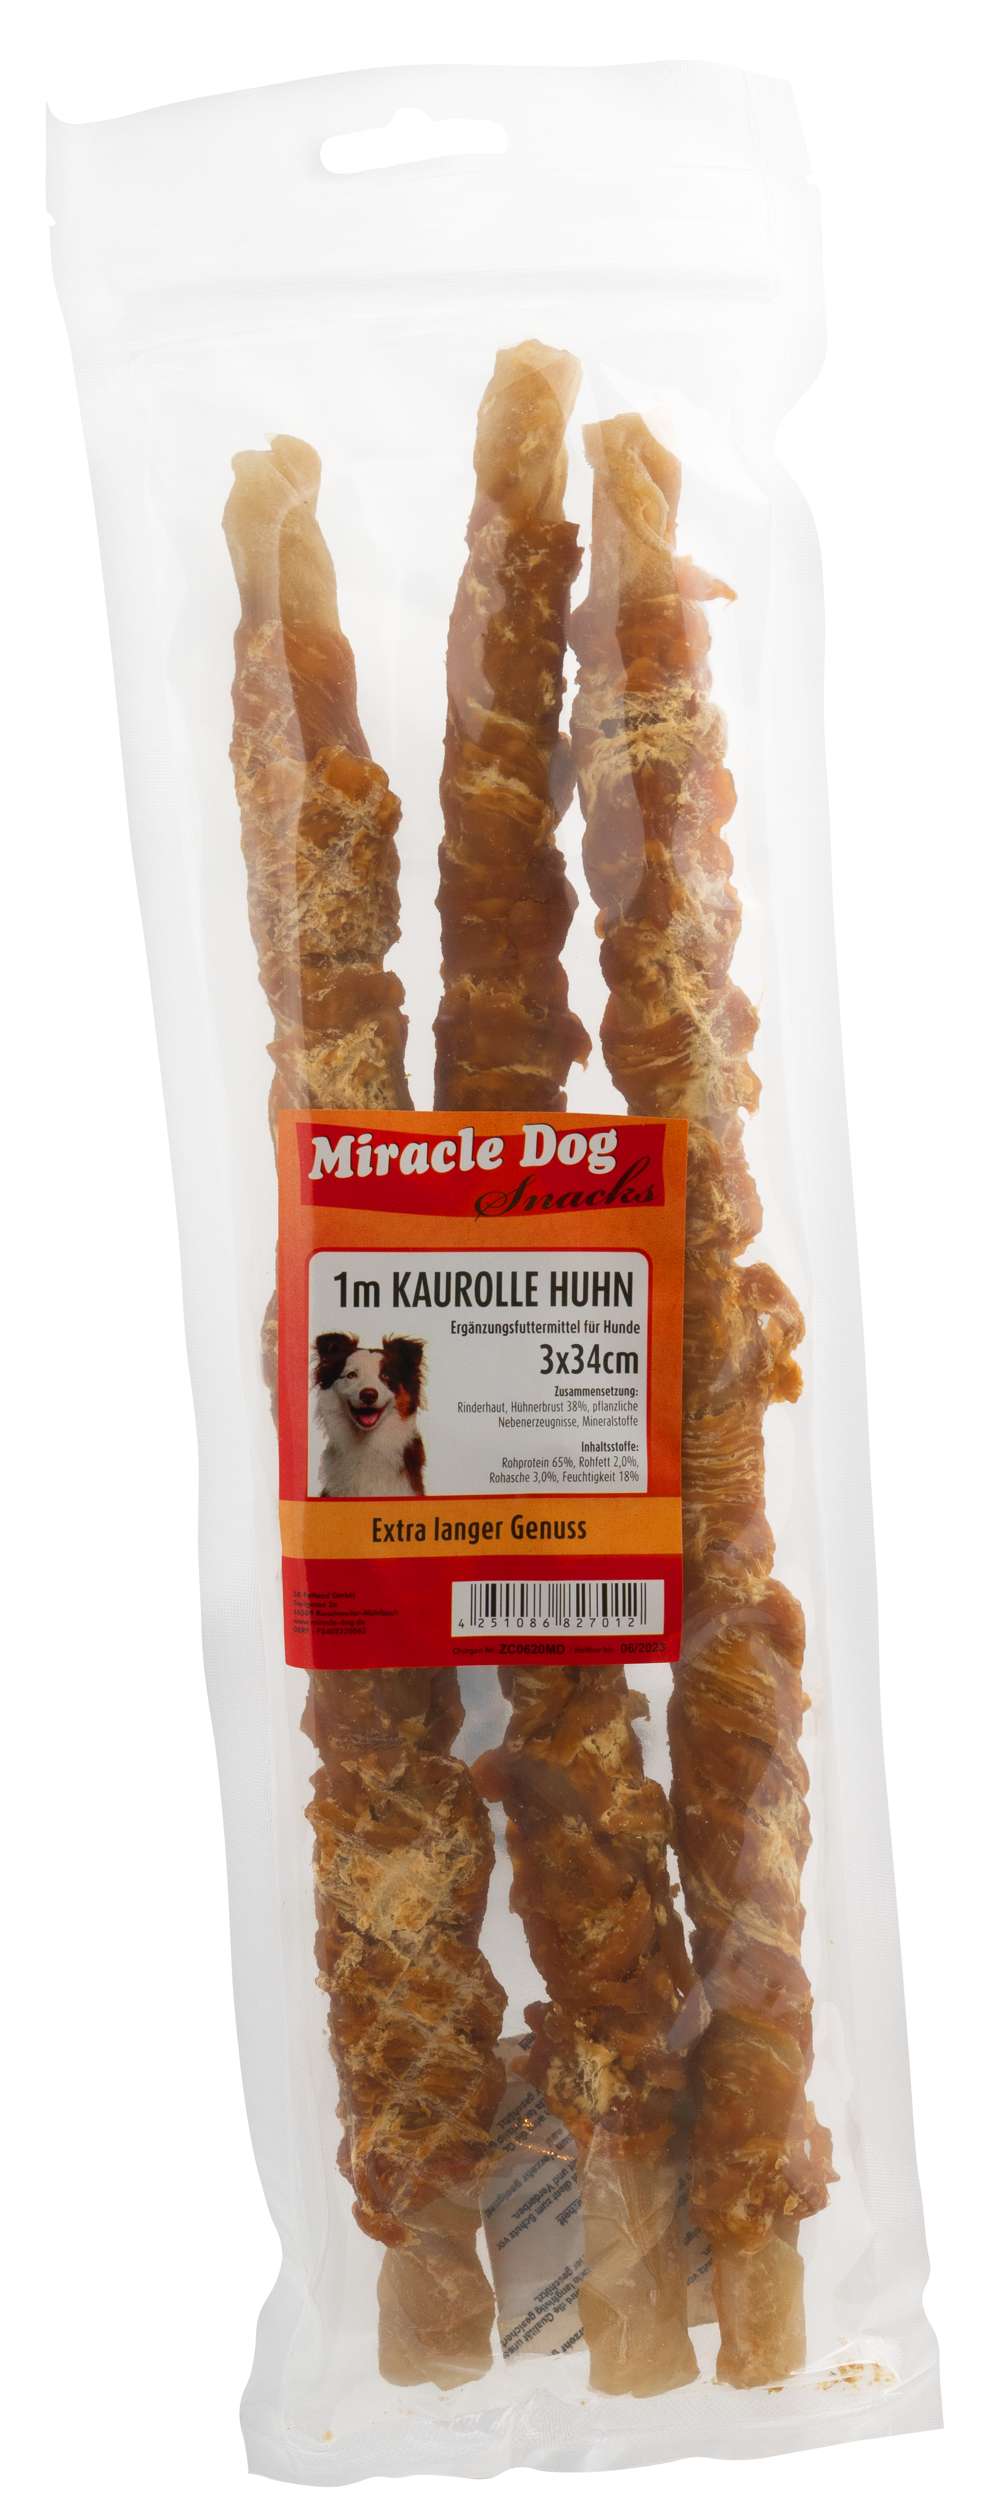 Miracle Dog 1m Kaurolle